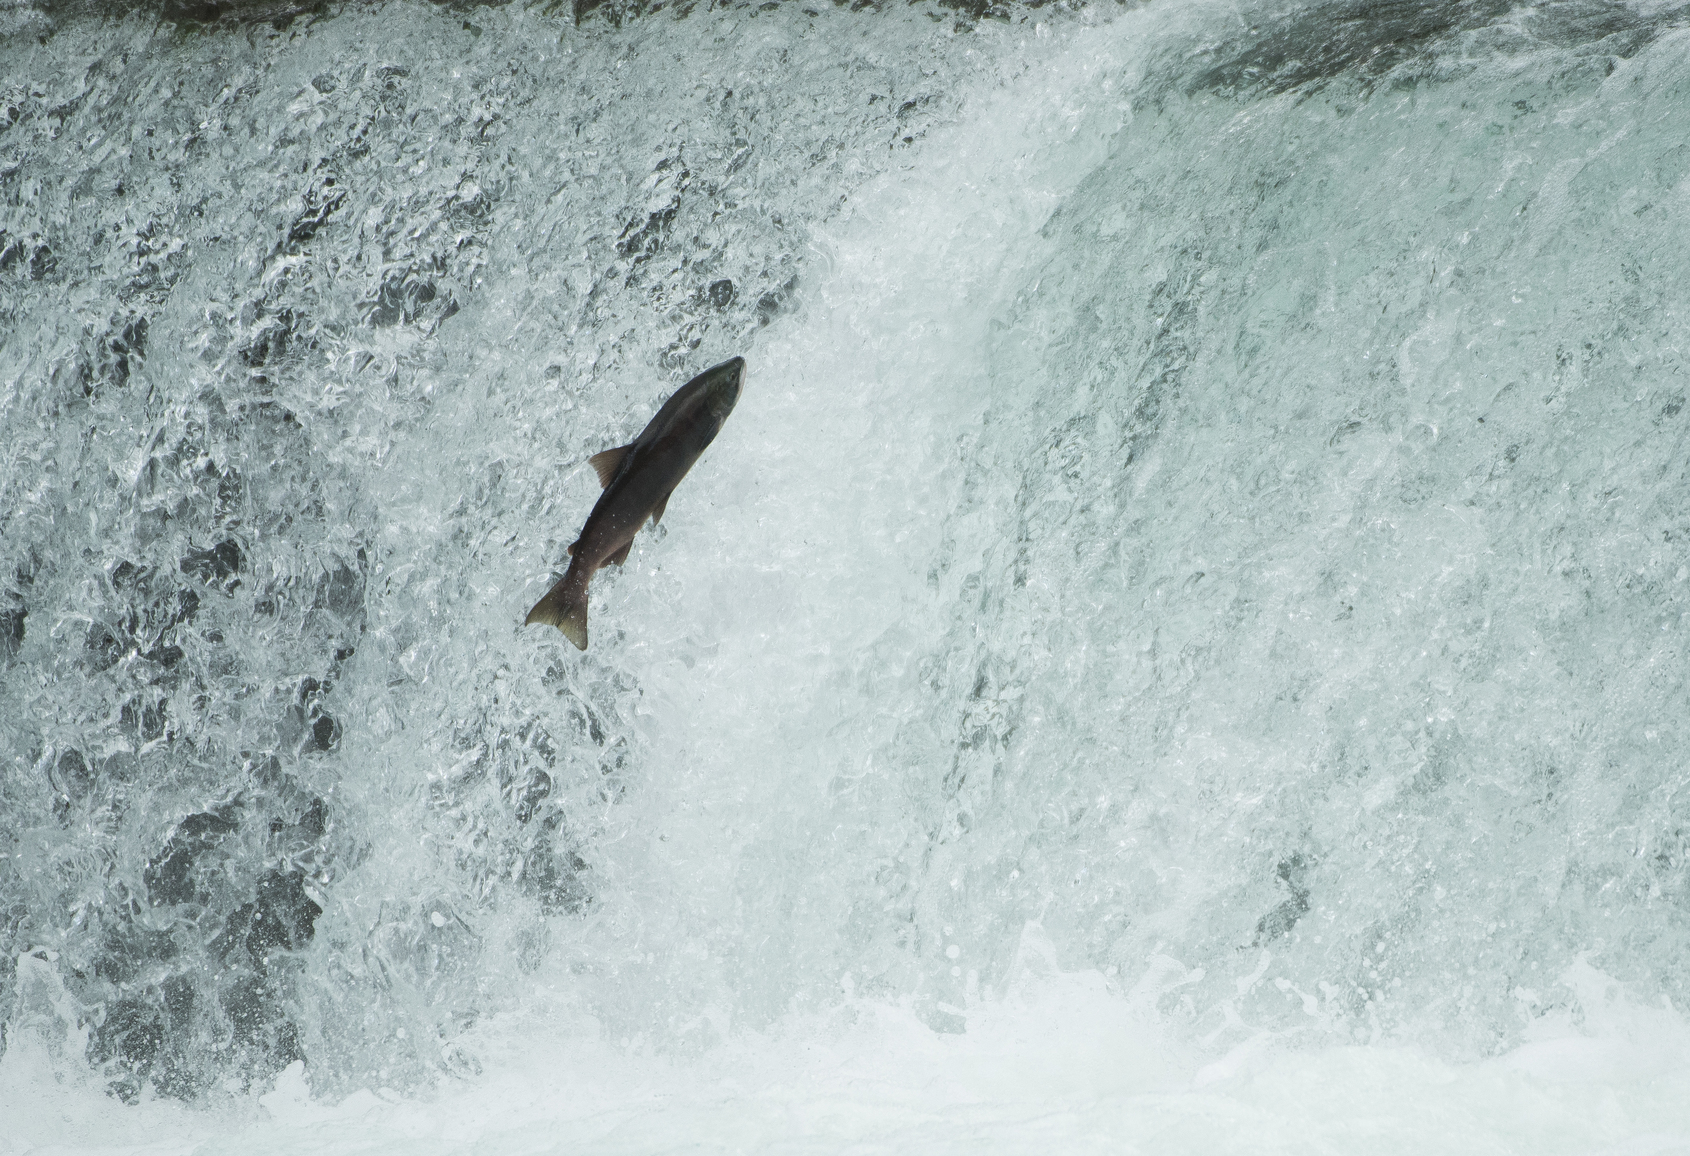 Salmon jumping up the falls.